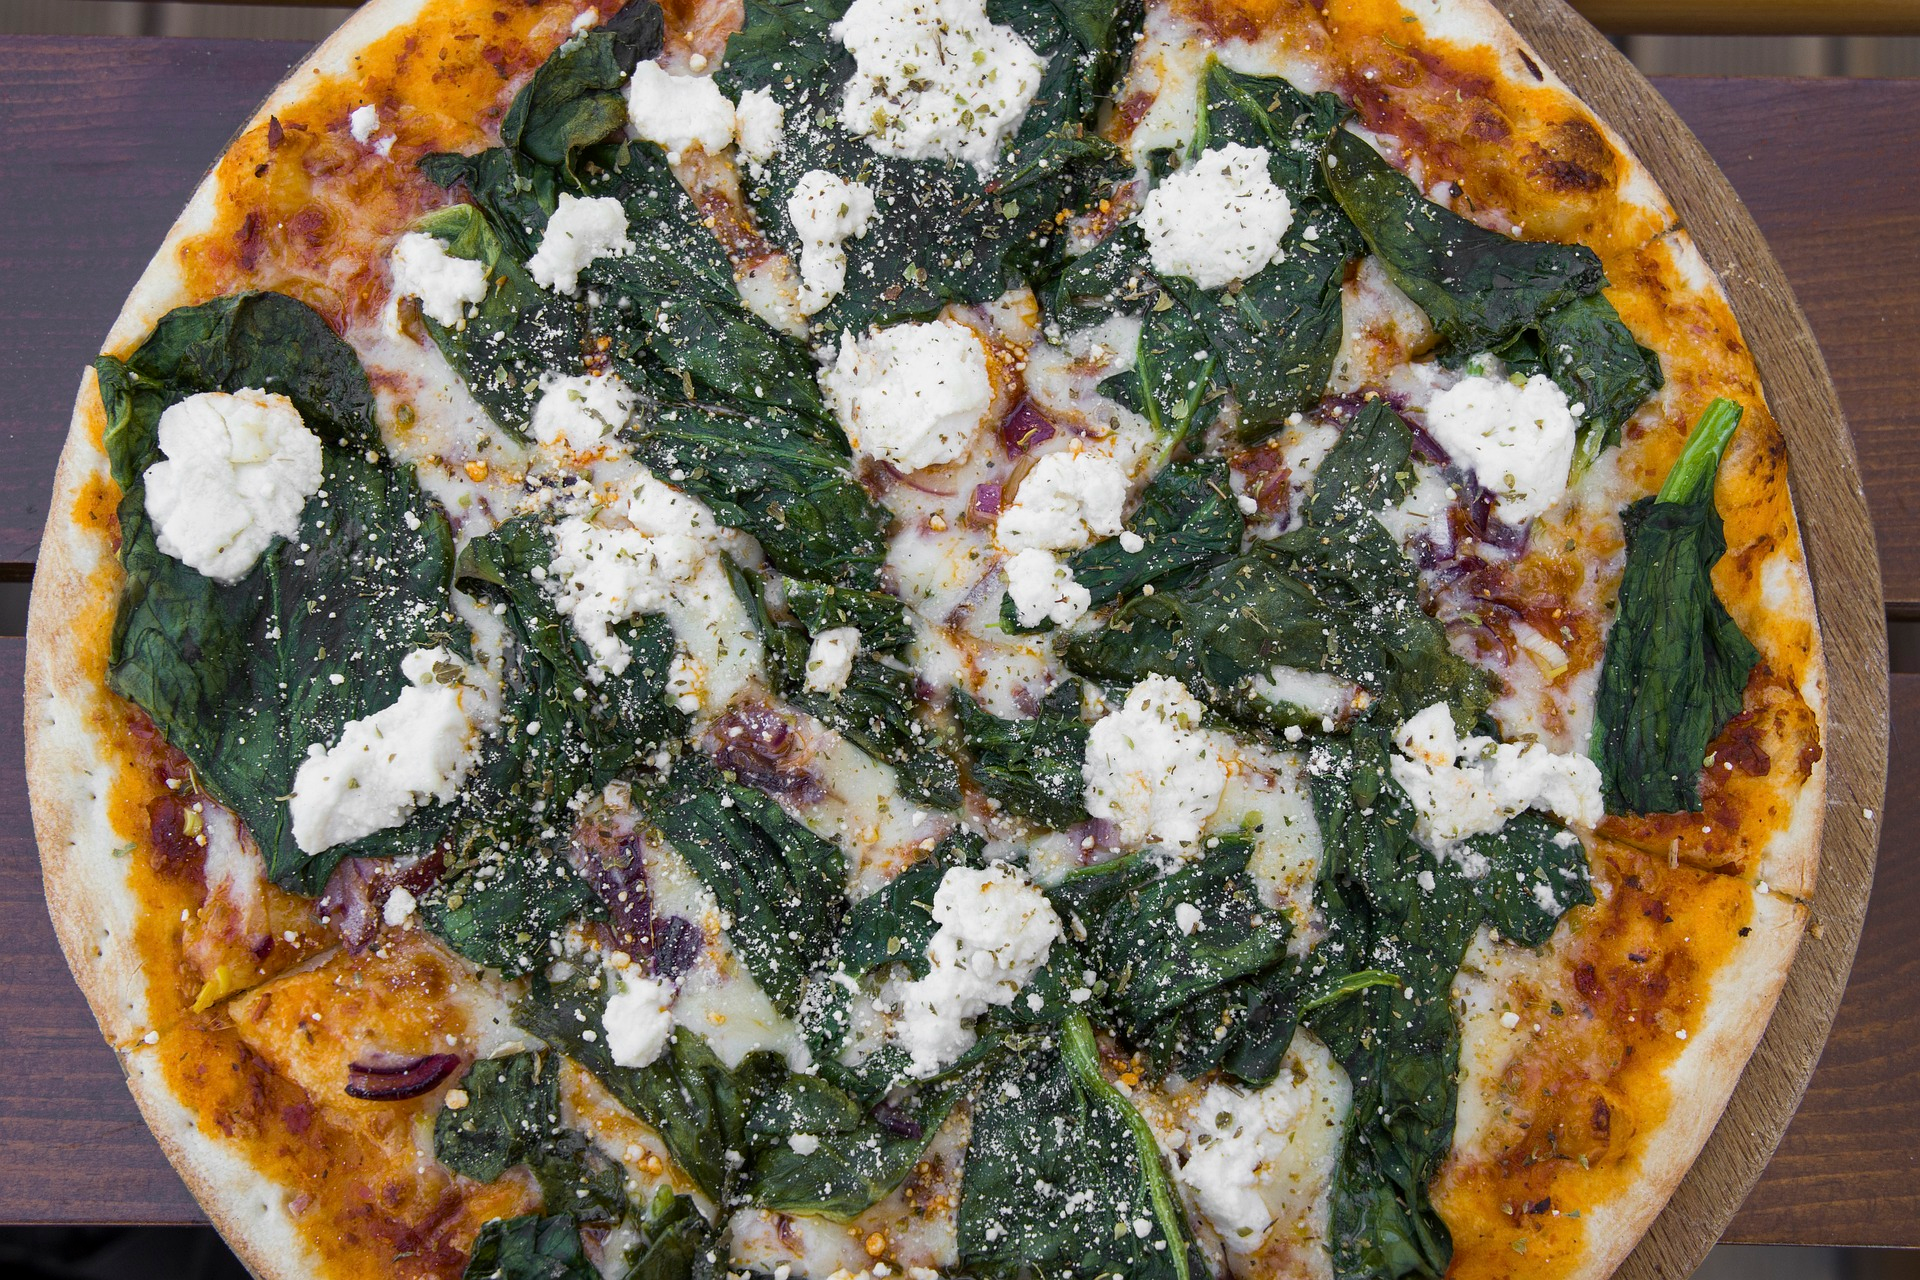 Artichoke and spinach toppings